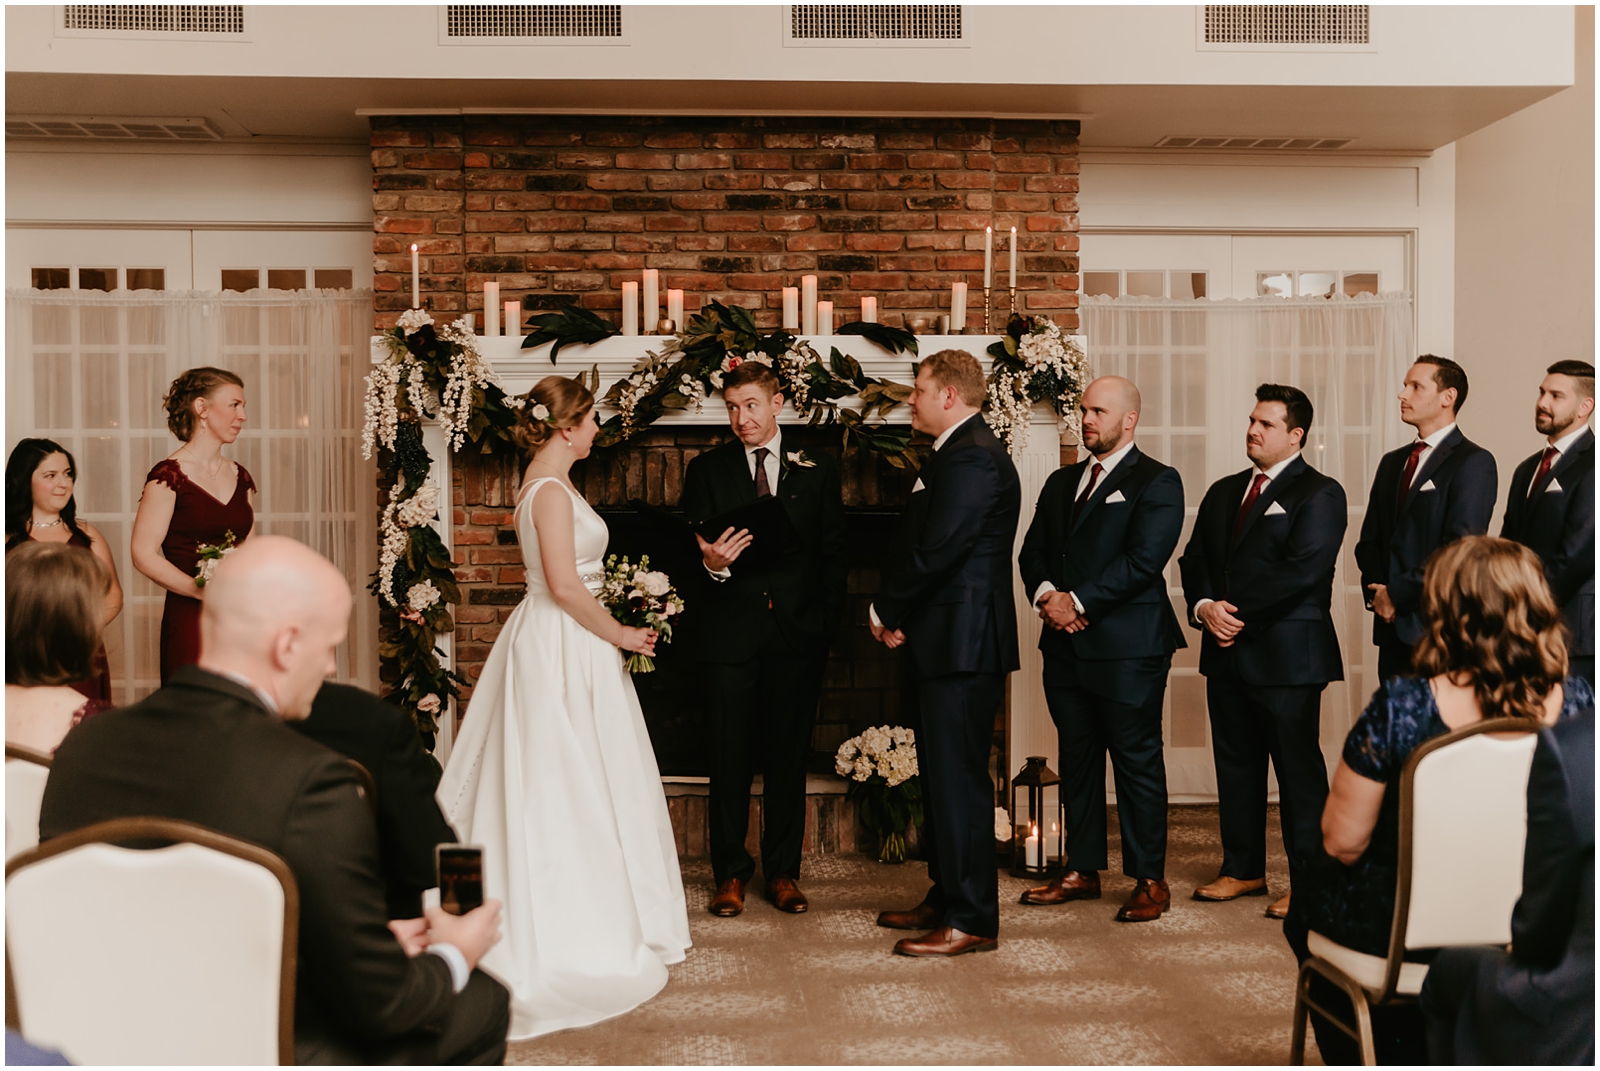 Indoor ceremony at The Tanglewood Club